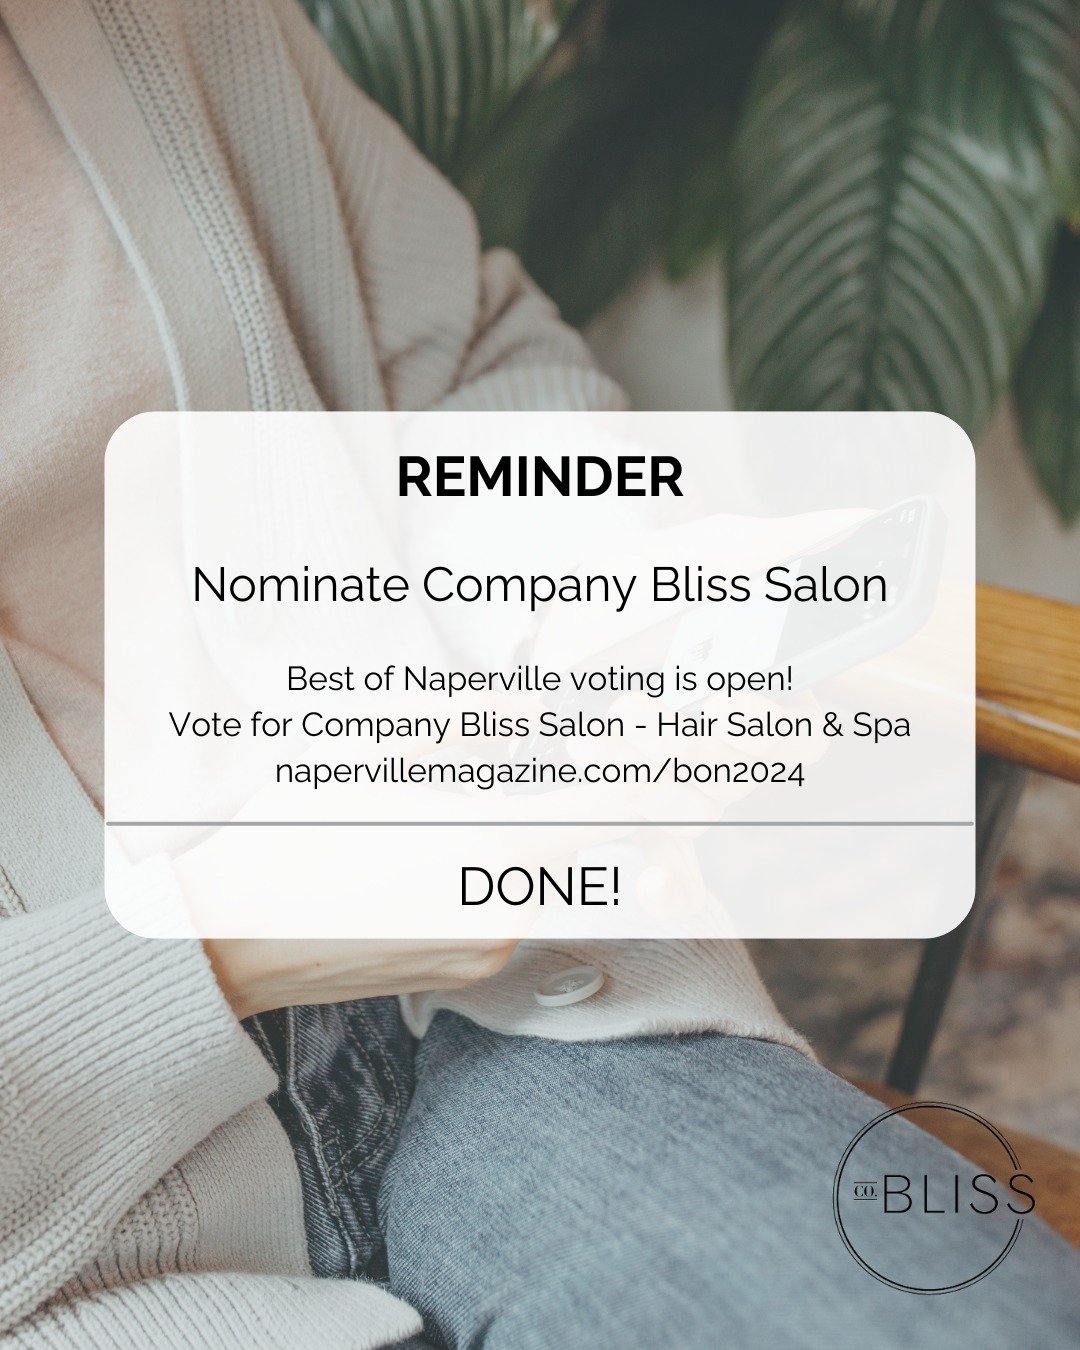 💖 Nominate us as the Best of Naperville! 💖

We're eligible to be nominated for Best Hair Salon of Naperville and your support means the world to us.

4 easy steps to nominate us:
1. Click the link in our bio that says &quot;Nominate us for Best of 